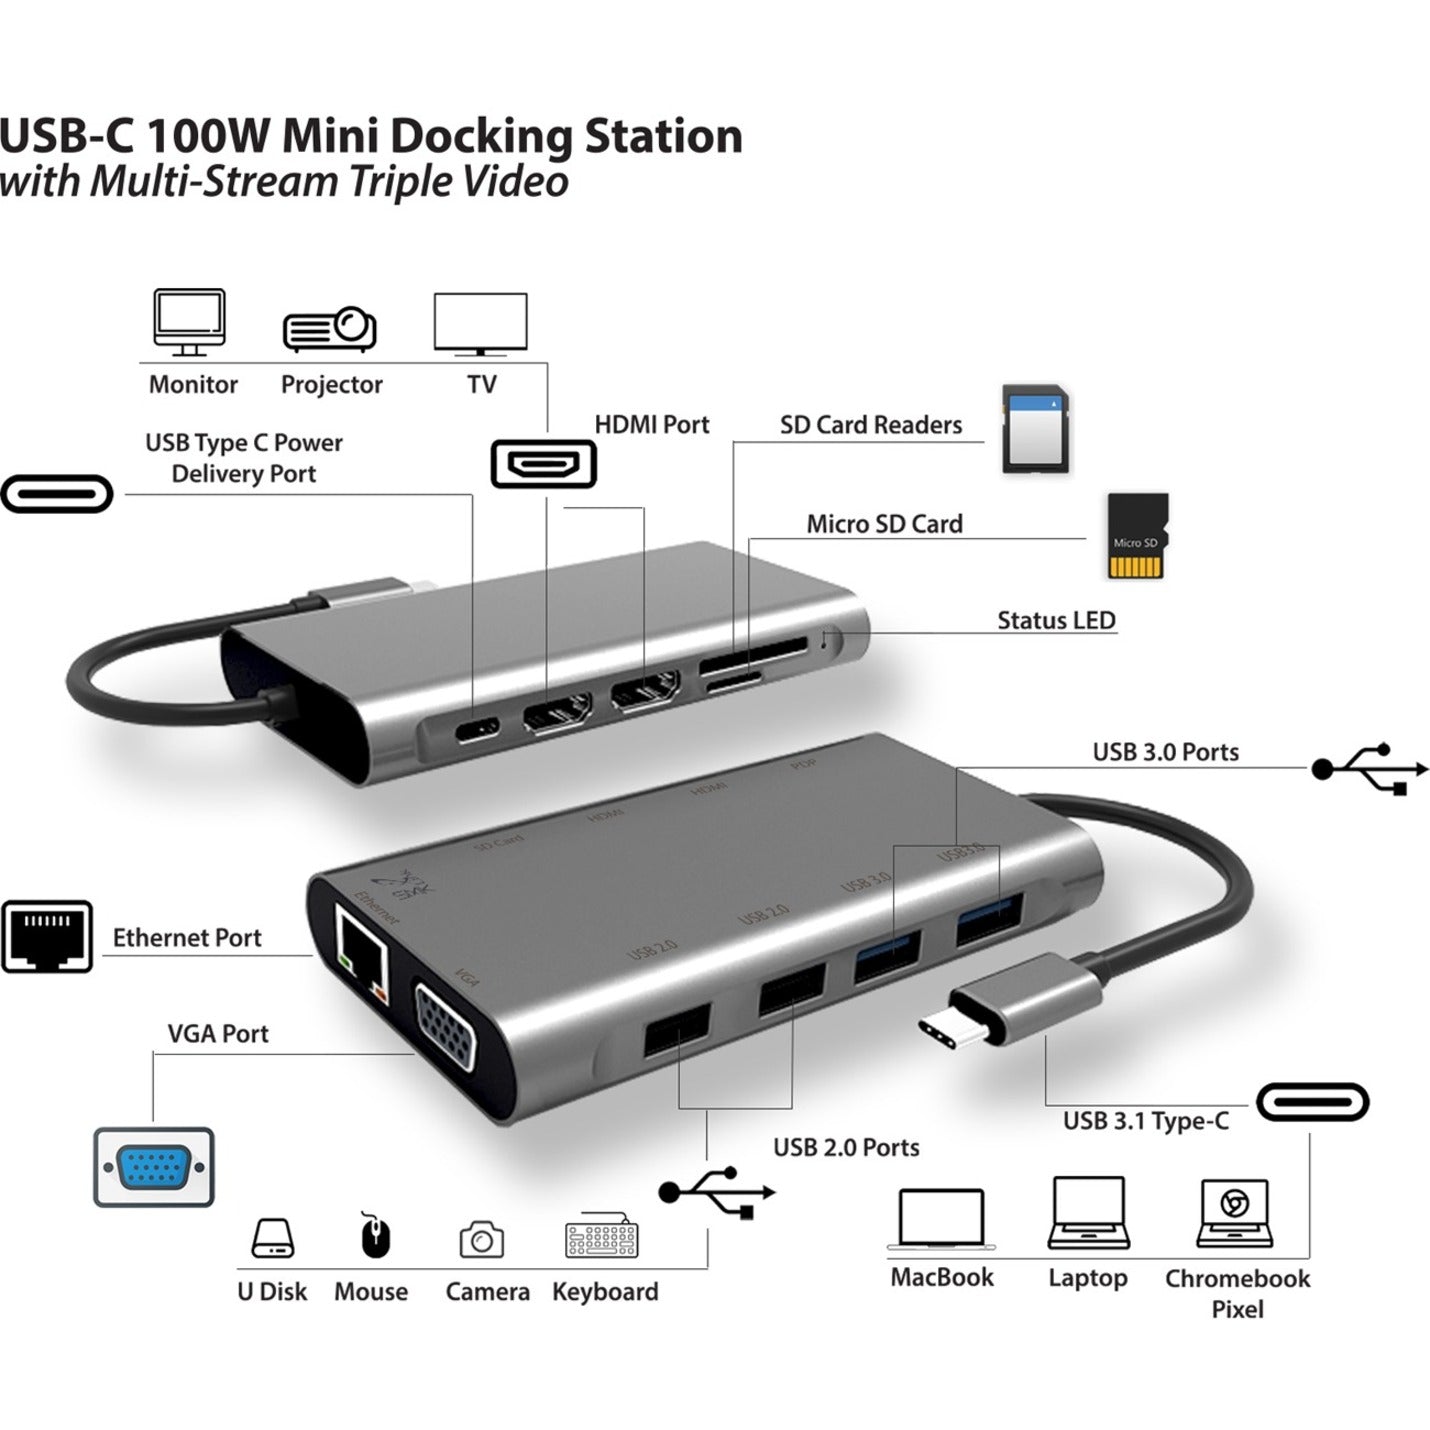 SMK-Link VP6950 USB-C 100W Mini Docking Station with Triple Video, Windows, macOS, Android, Chromebook Compatibility